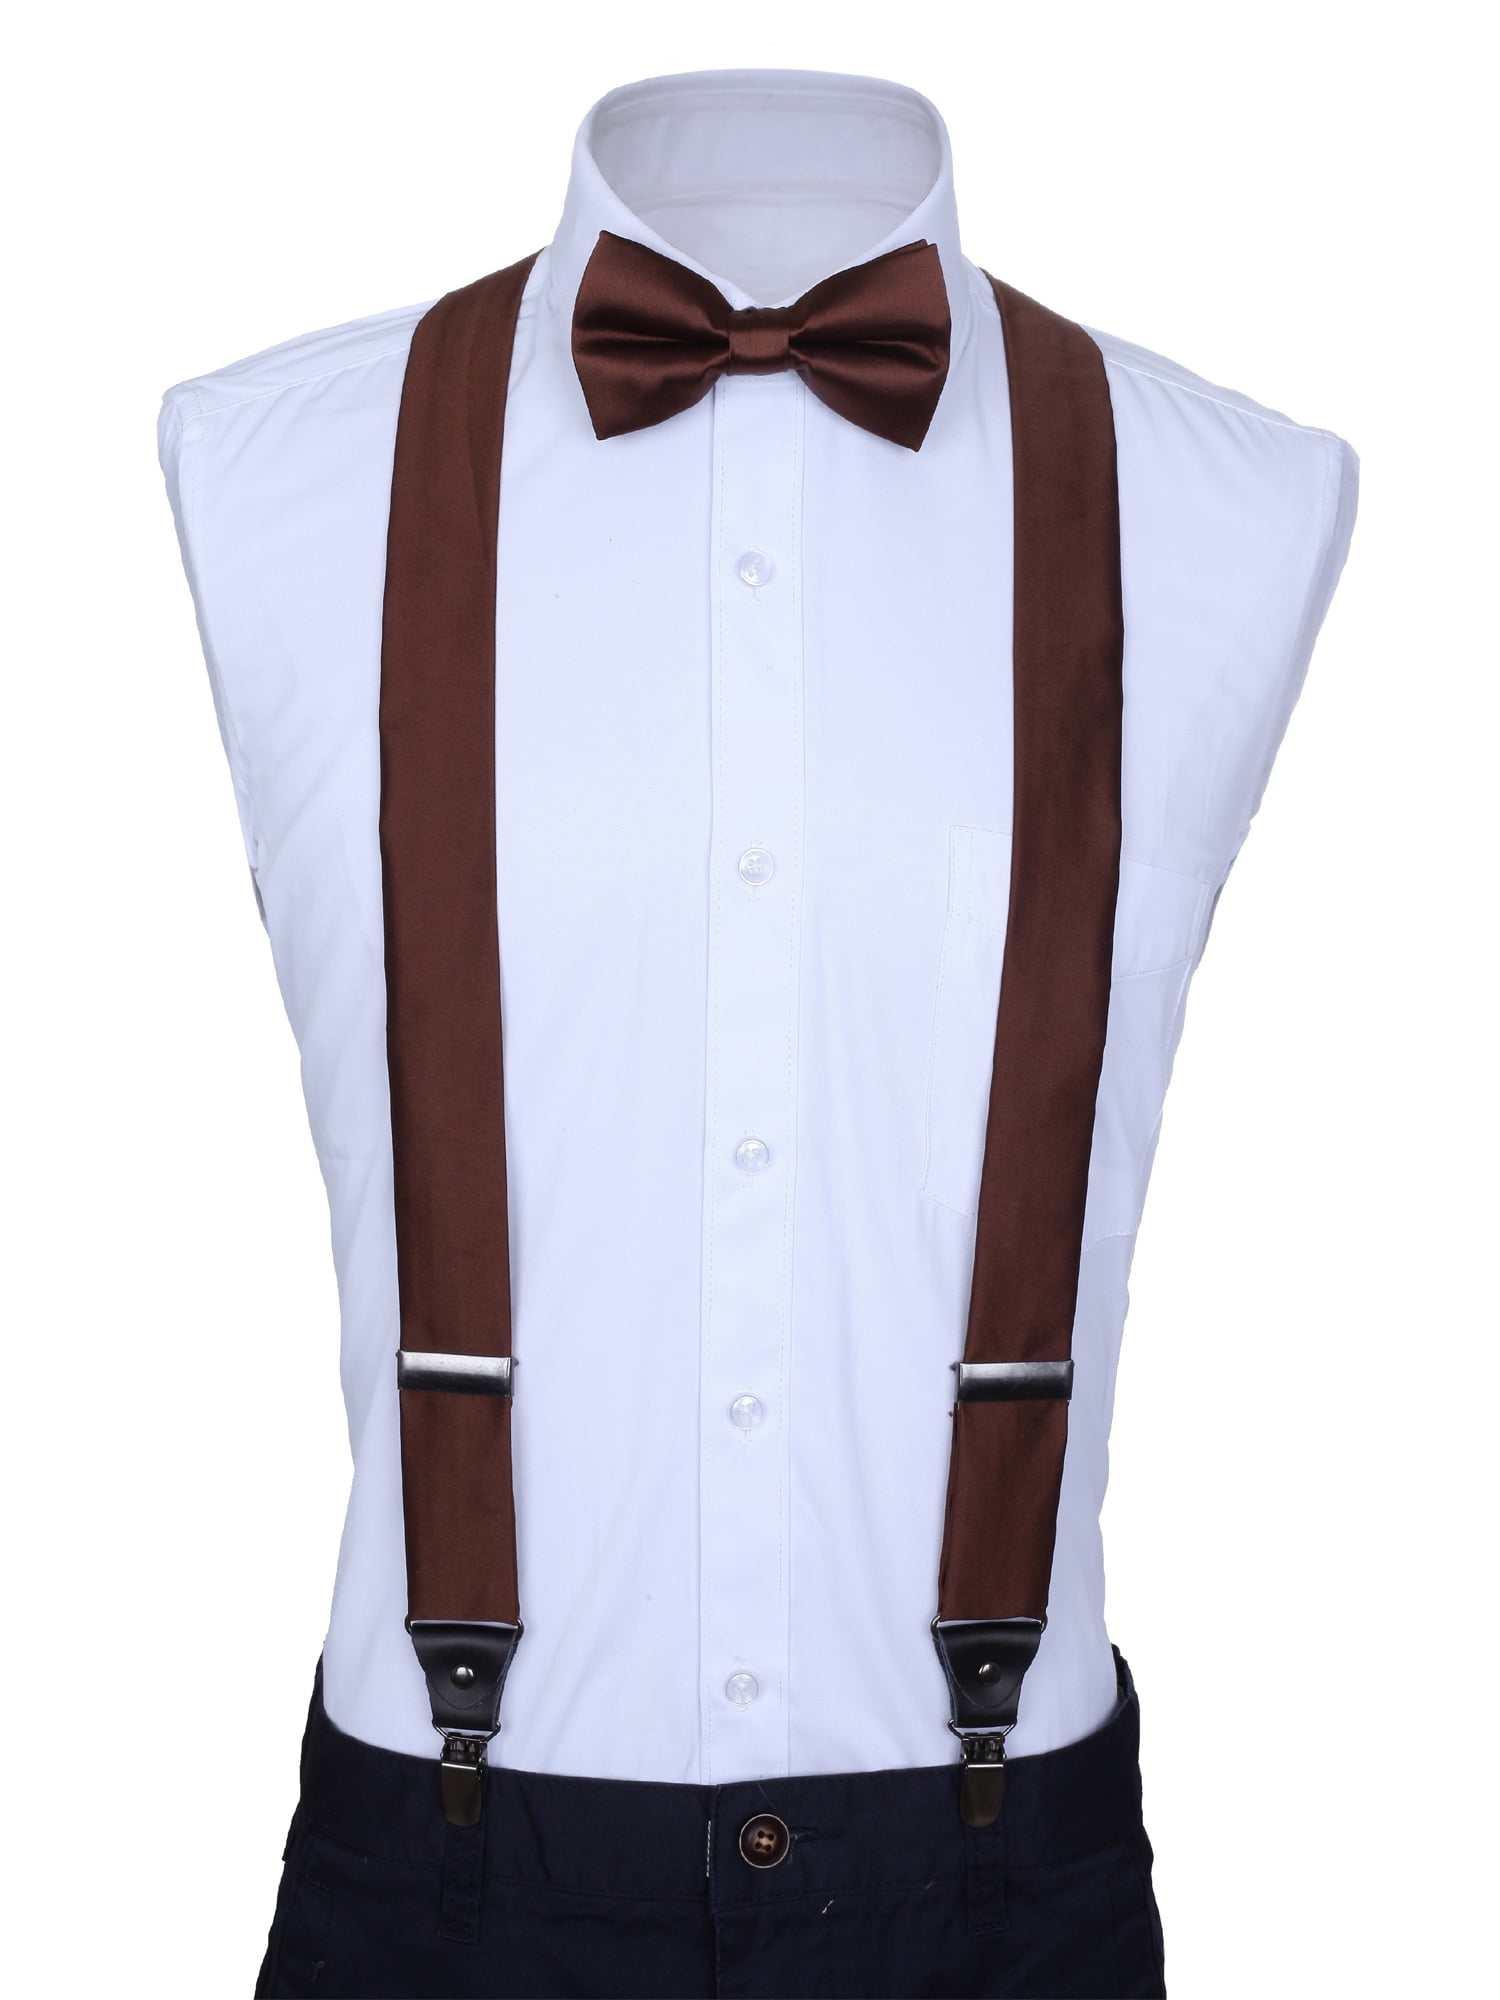 Details about   SUSPENDERS and BOW TIE COMBO SET-Tuxedo Classic Wedding Costume Tux Prom 